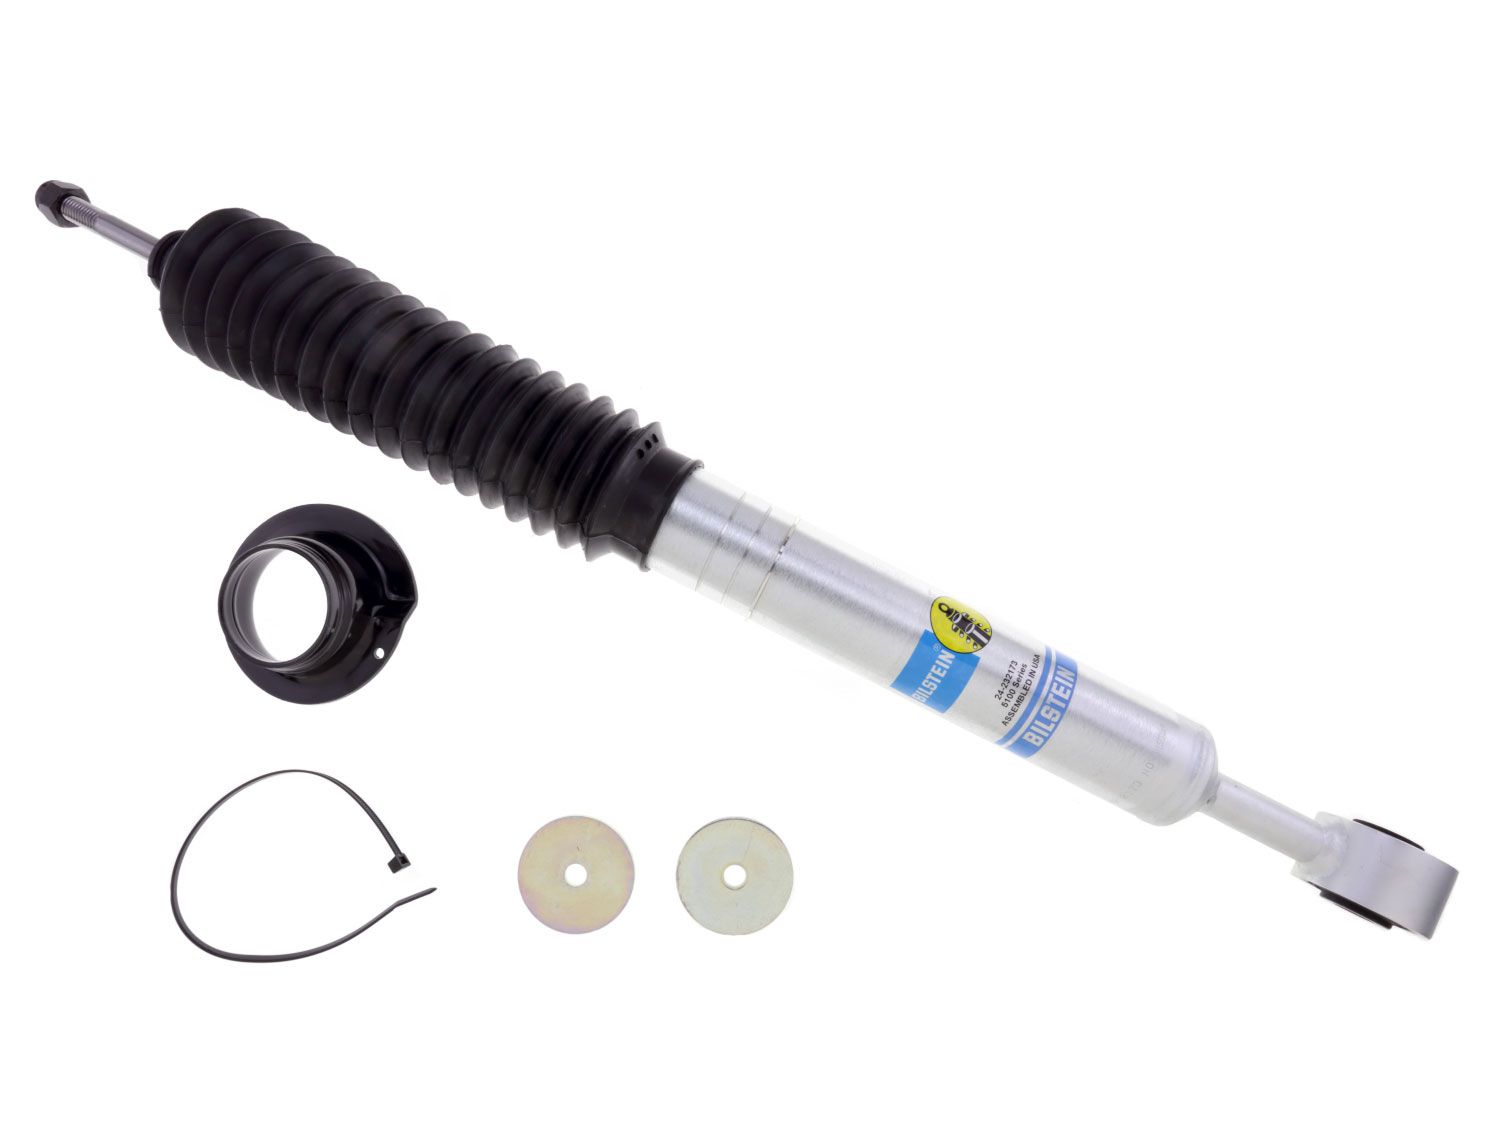 Tundra 2007-2021 Toyota 4wd & 2wd - Bilstein FRONT 5100 Series Adjustable Height Shock (.875-2.5" Front Lift)